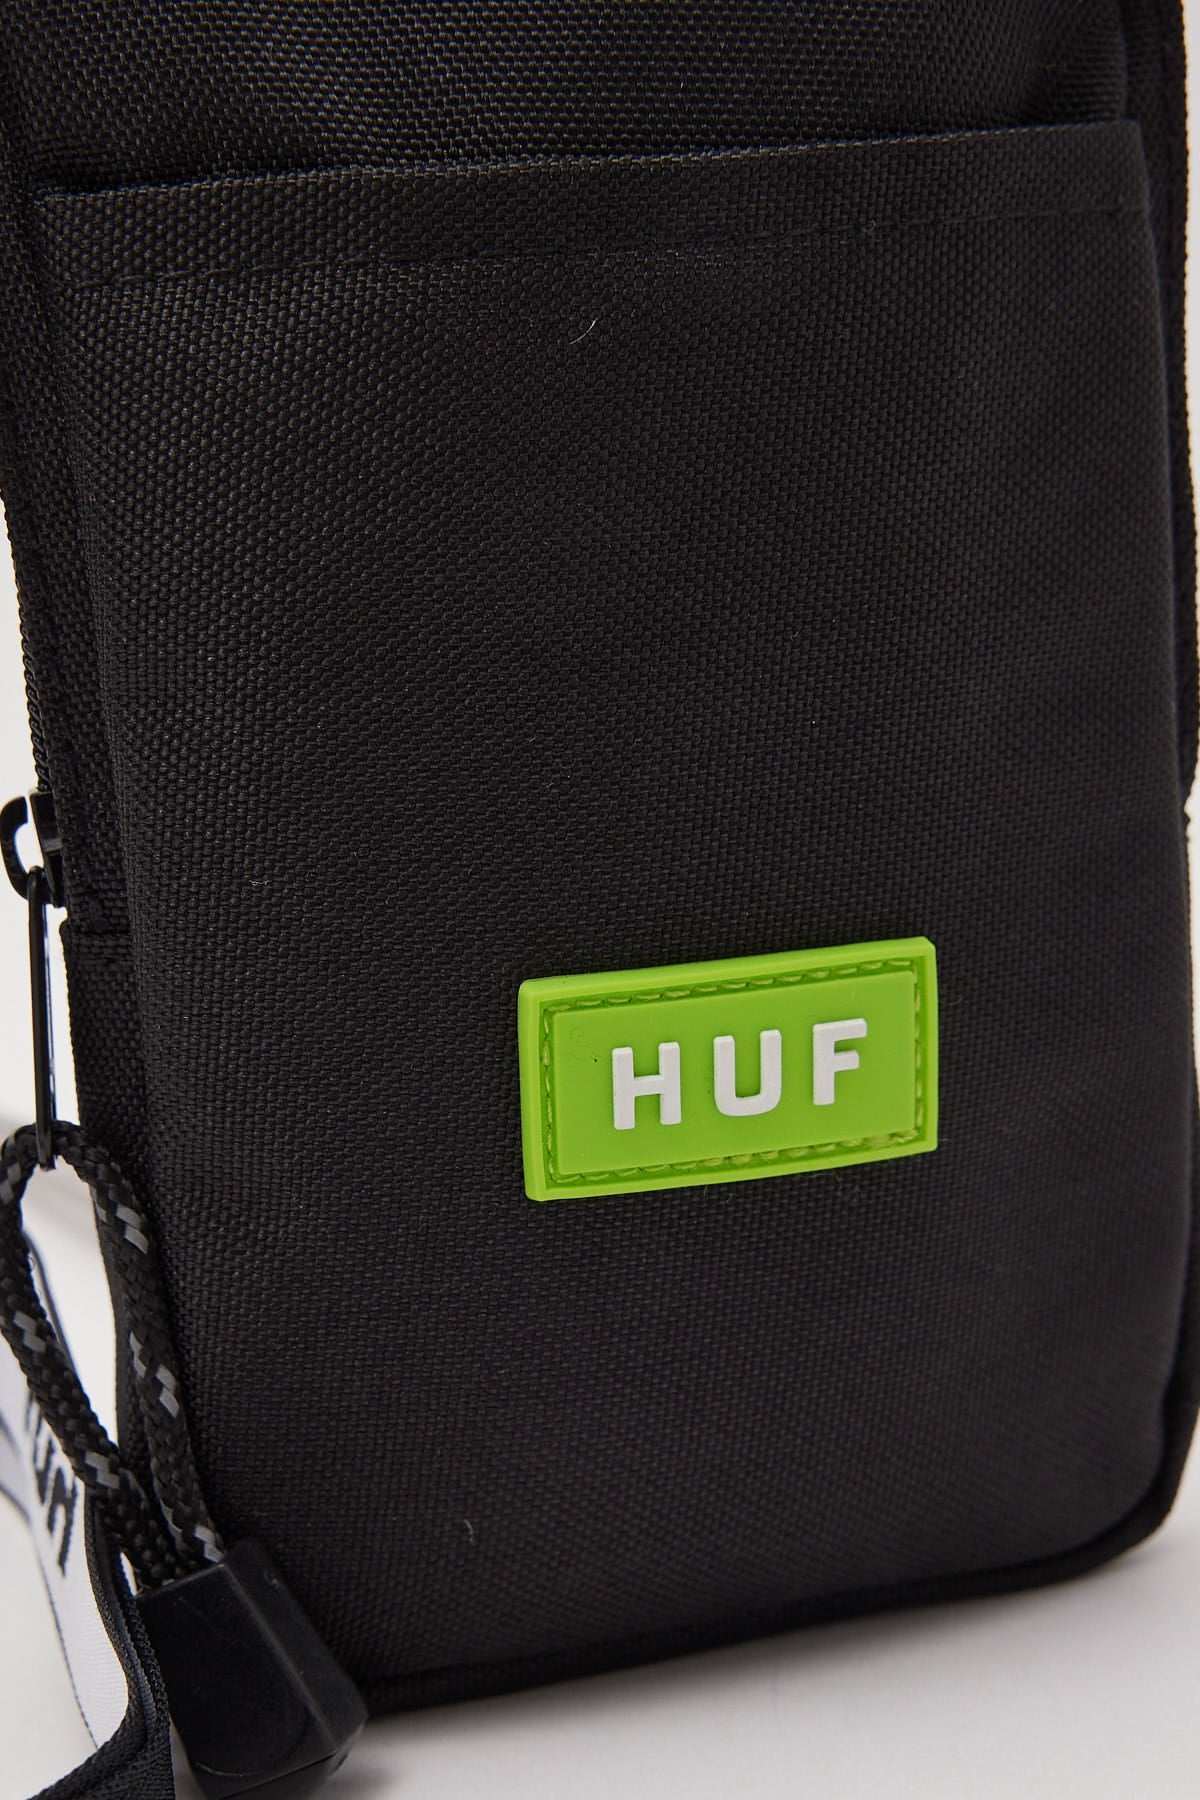 Huf Recon Lanyard Pouch Black